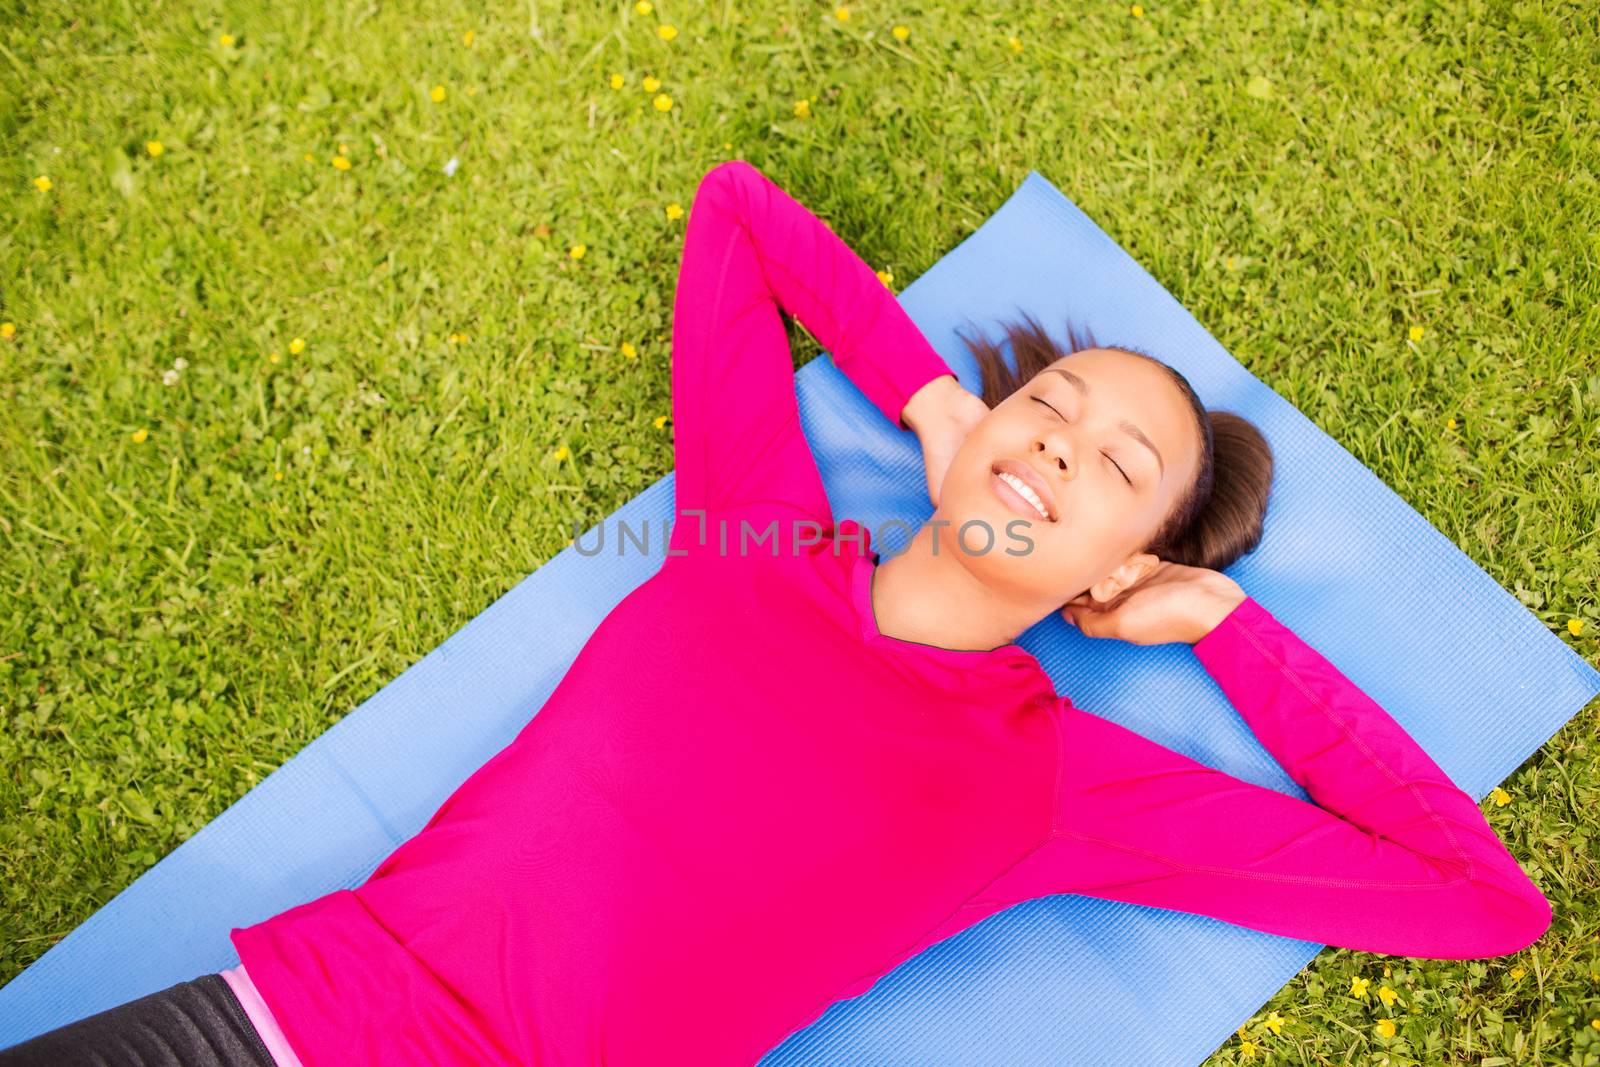 fitness, sport, training, park and lifestyle concept - smiling african american woman doing exercises lying on mat outdoors